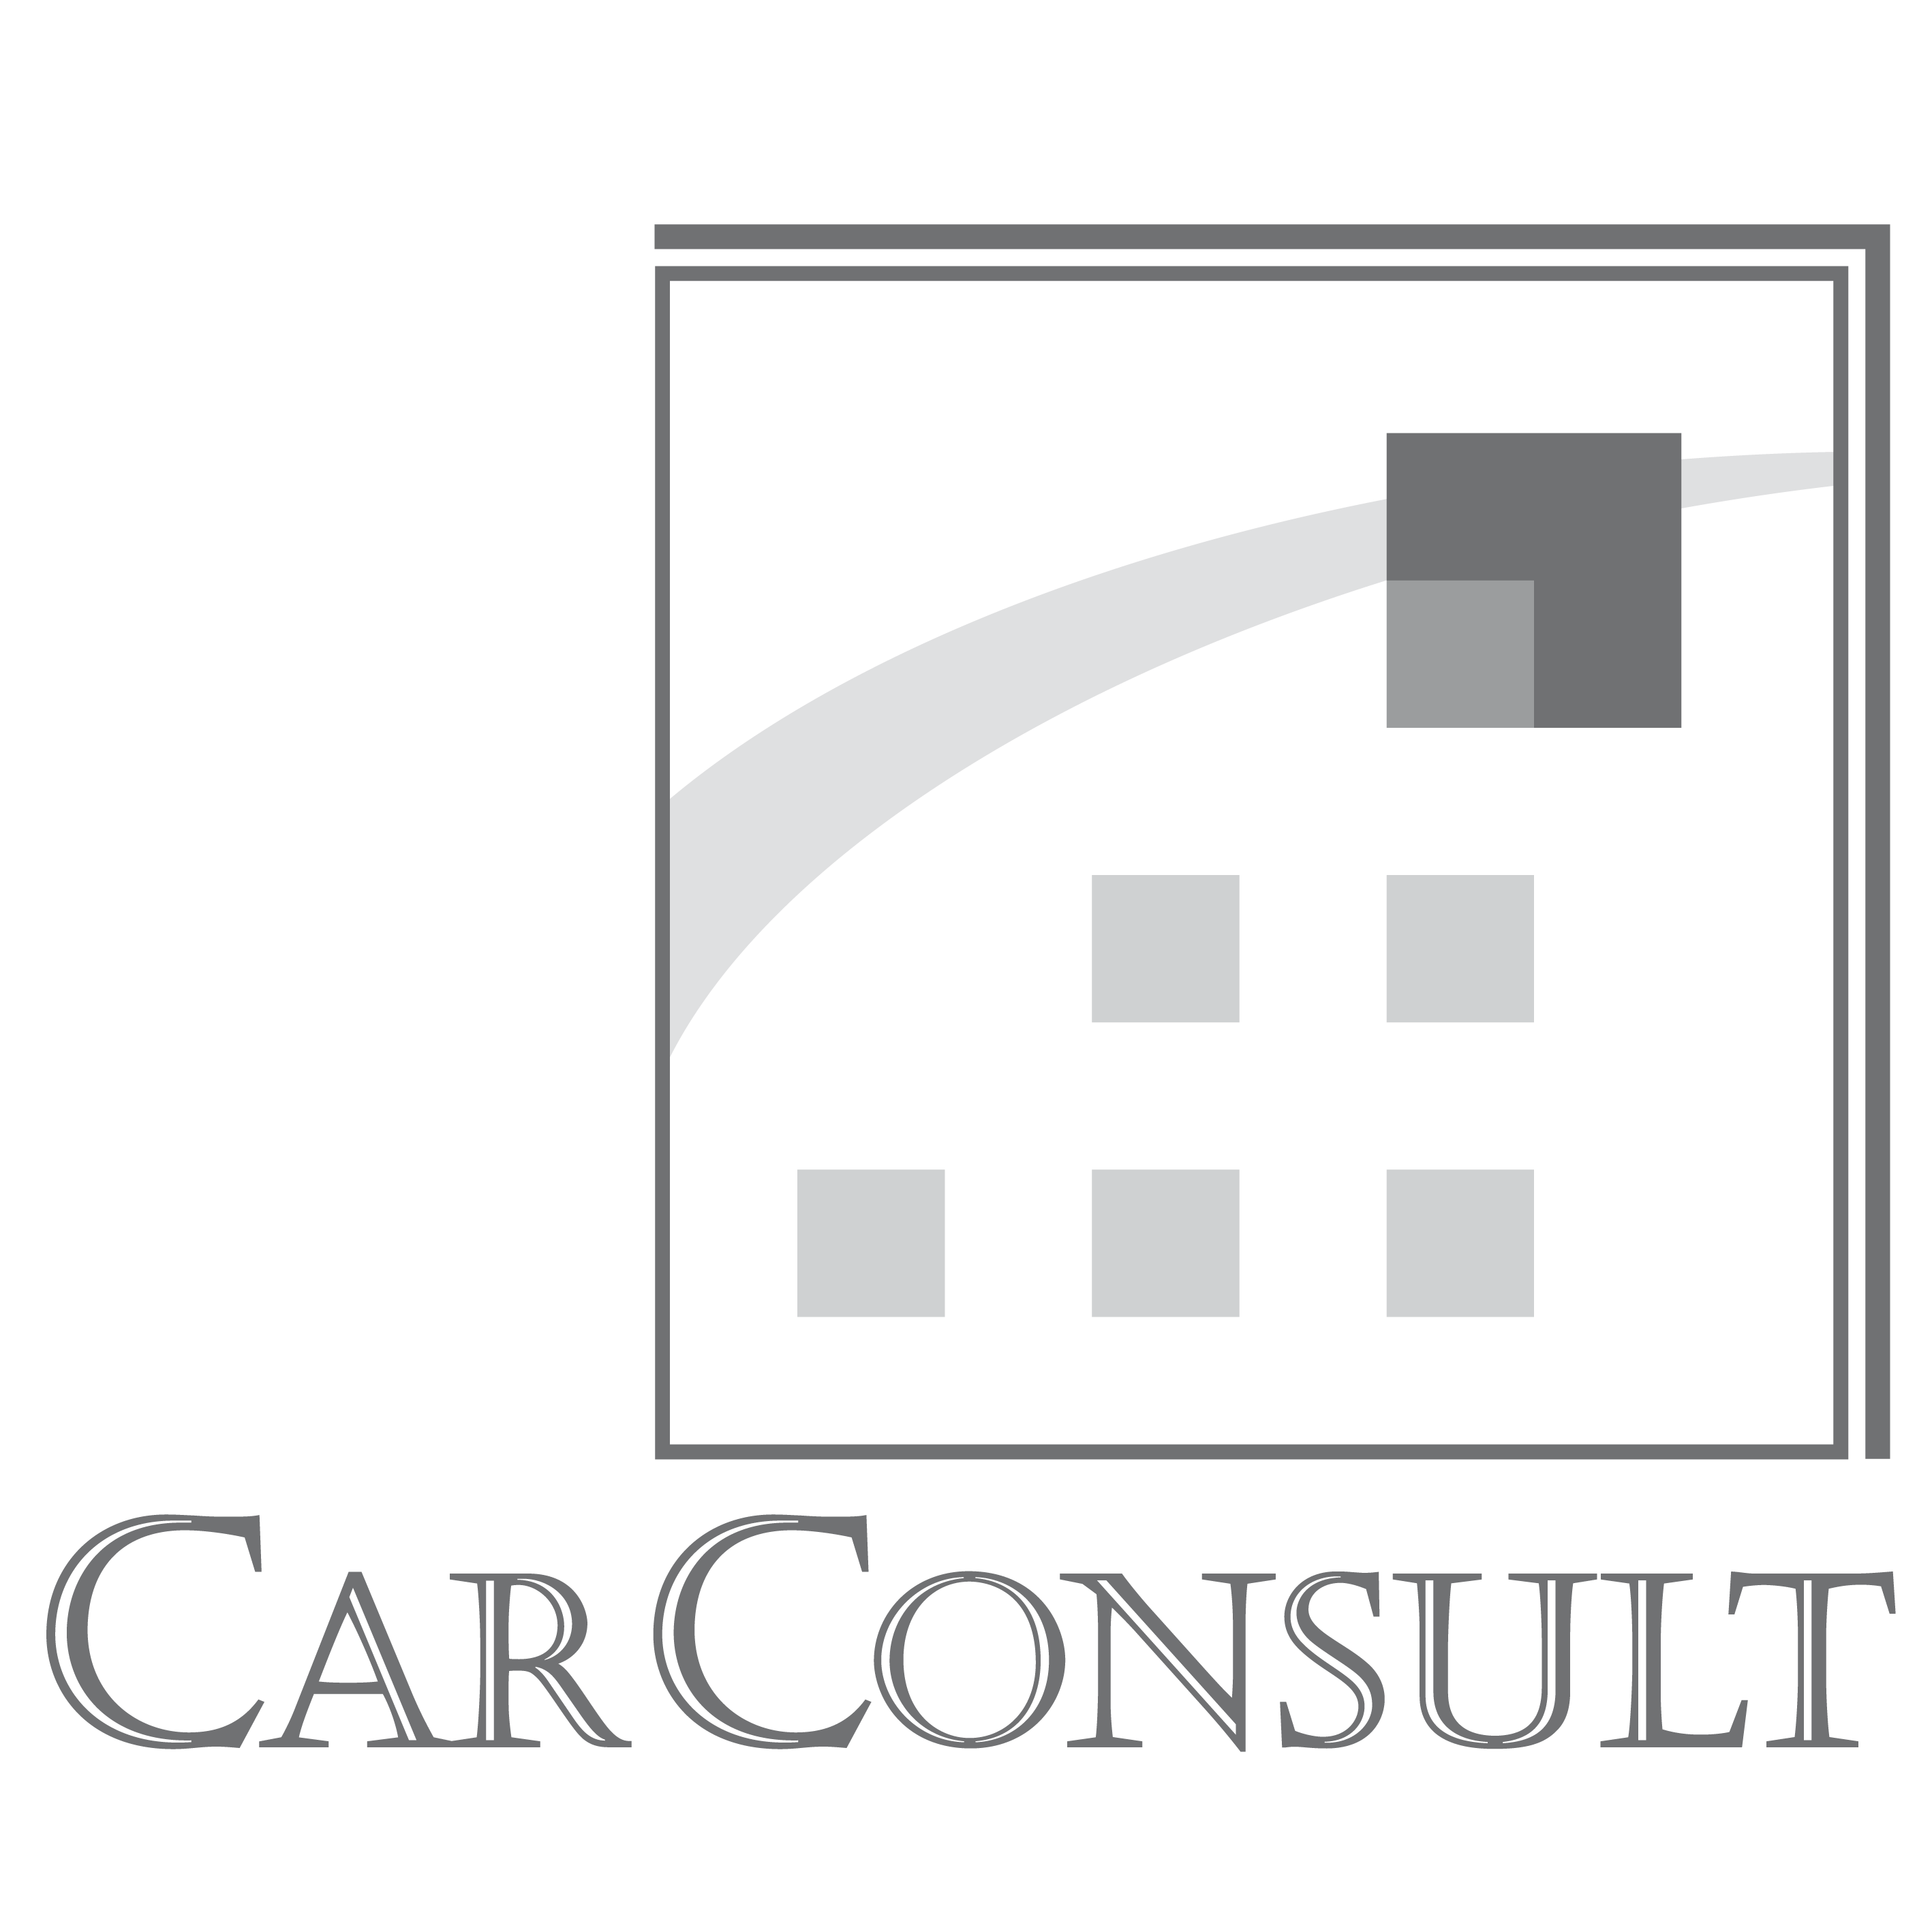 CarConsult